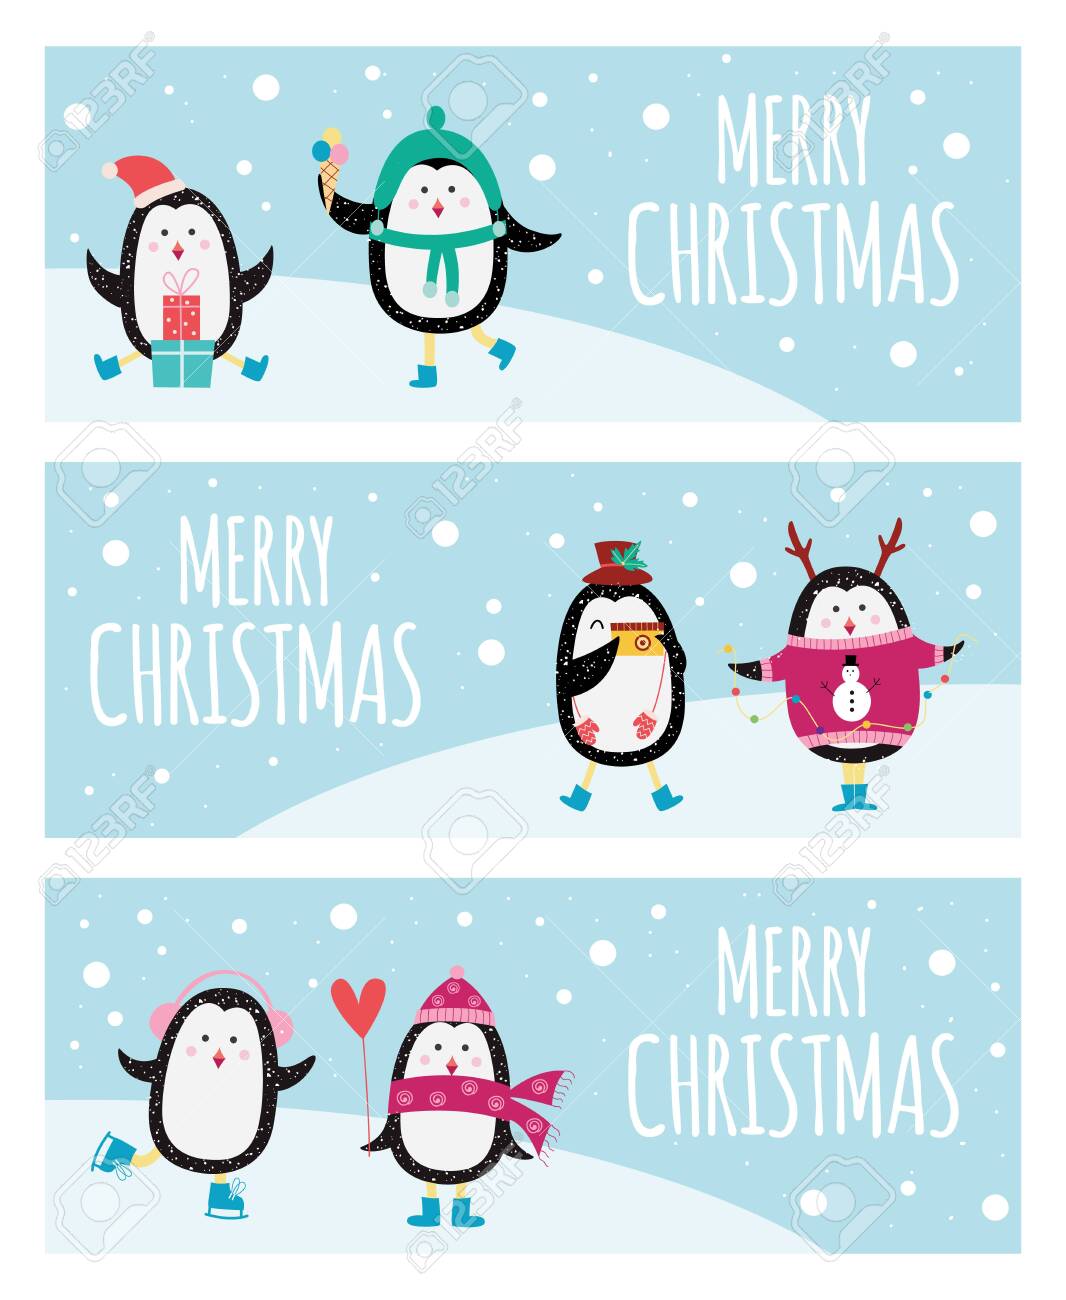 125390609-cute-cartoon-penguin-banner-set-merry-christmas-greeting-cards-with-cute-animals-dressed-in-cozy-win.jpg